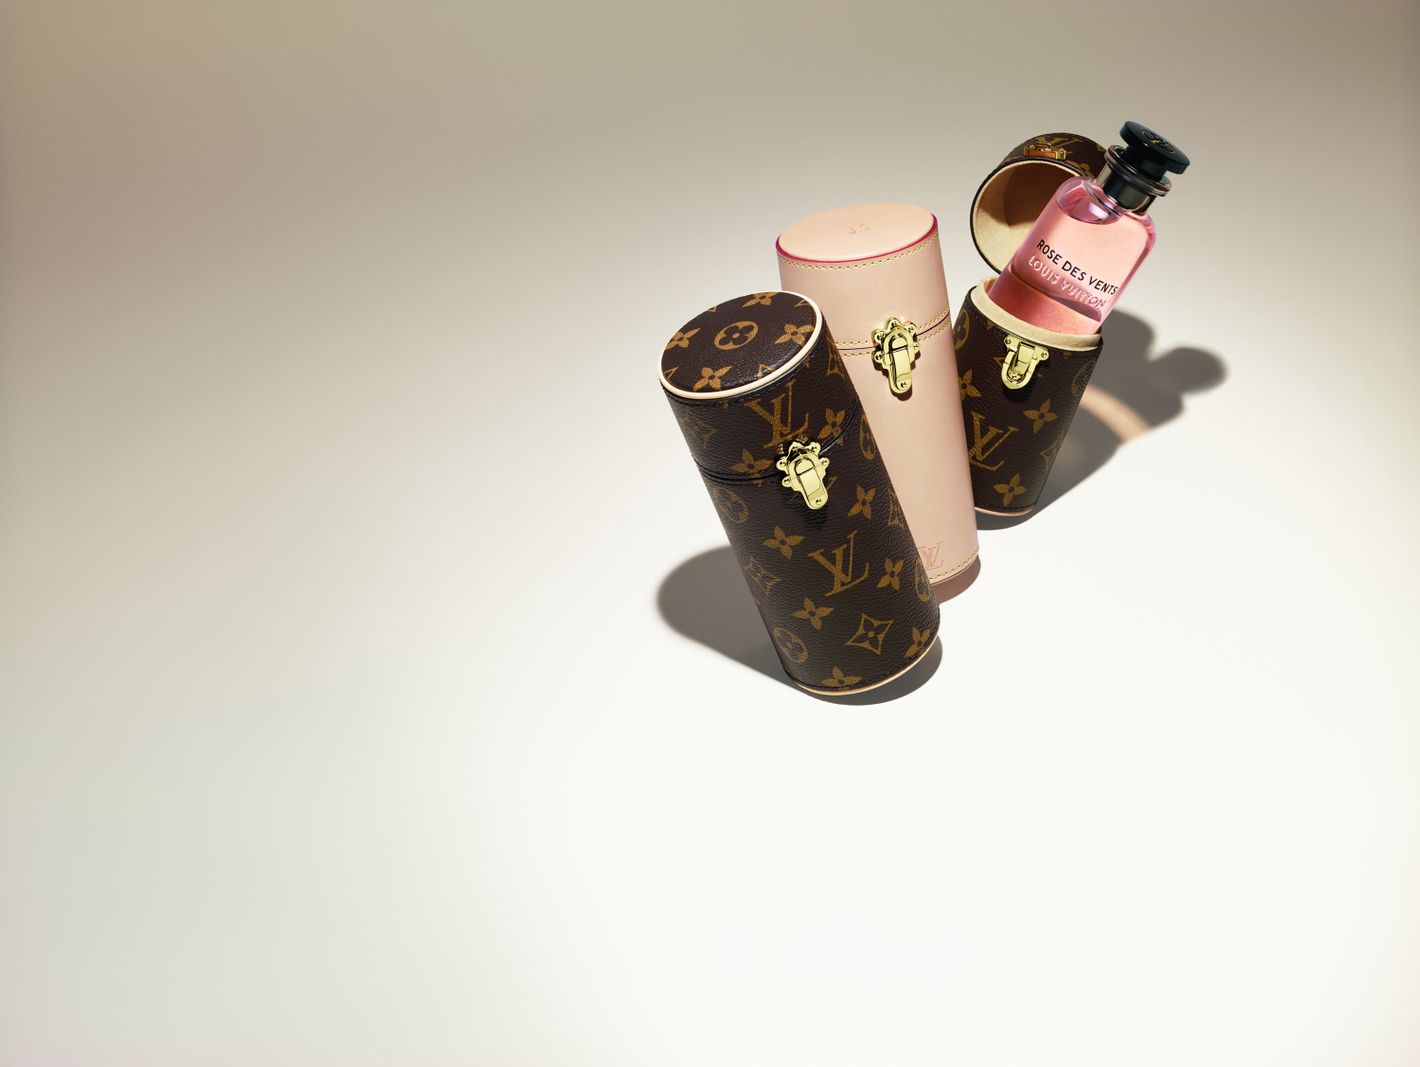 Louis Vuitton Invented an Accessory to Accompany Its Perfume